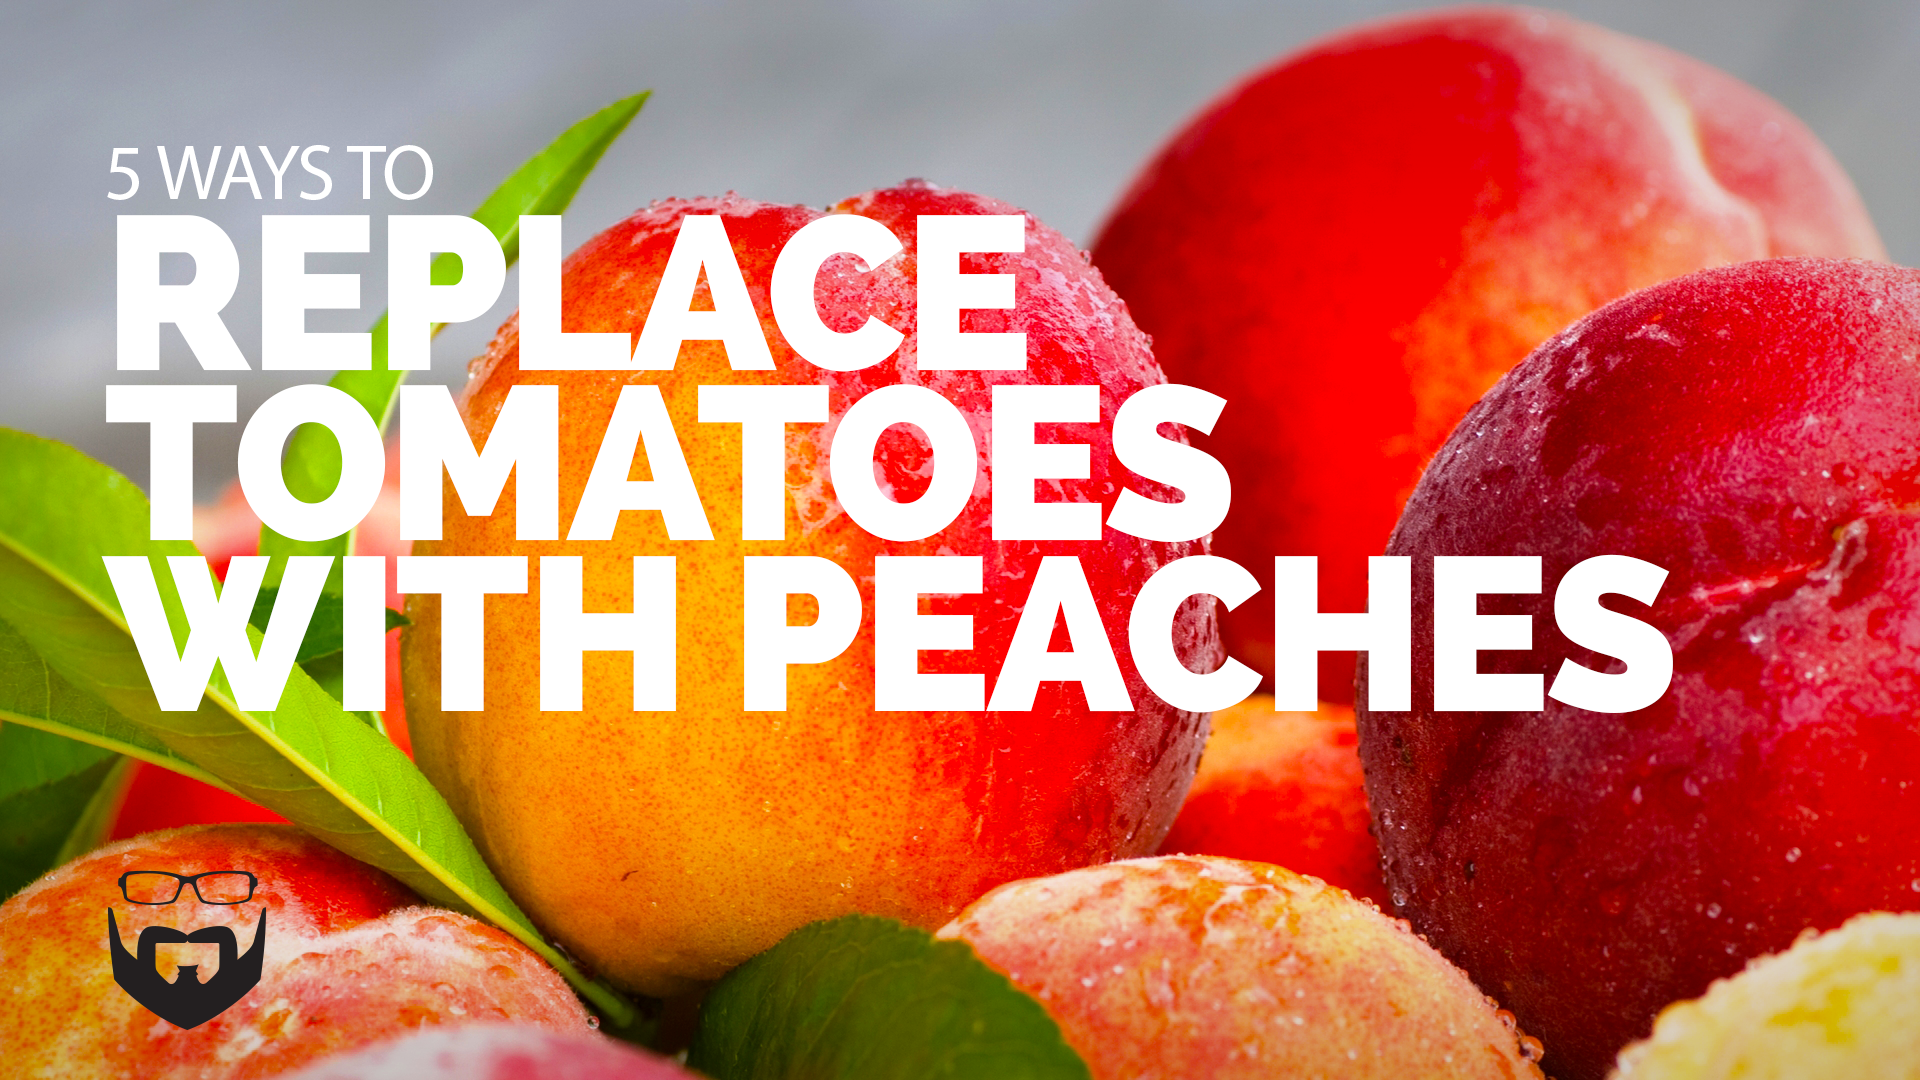 5 ways to replace tomatoes with peaches